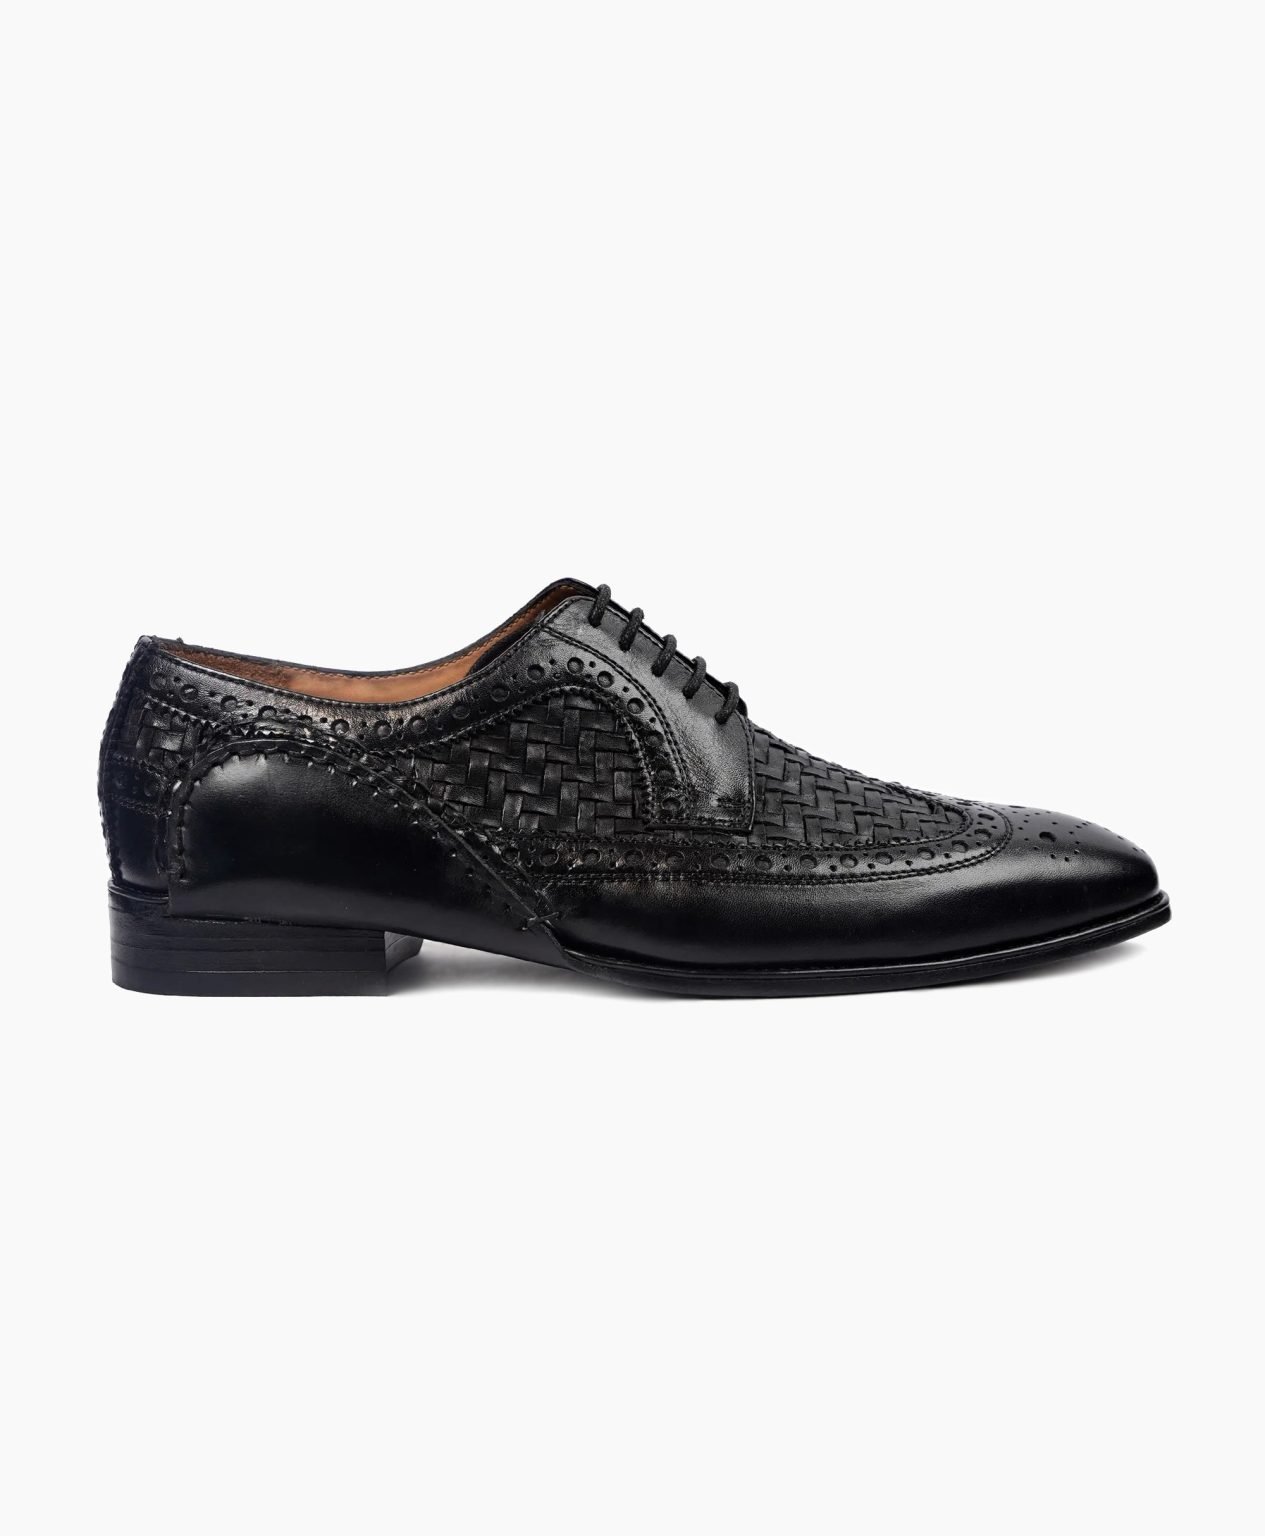 buxton-derby-black-woven-leather-shoes-image201